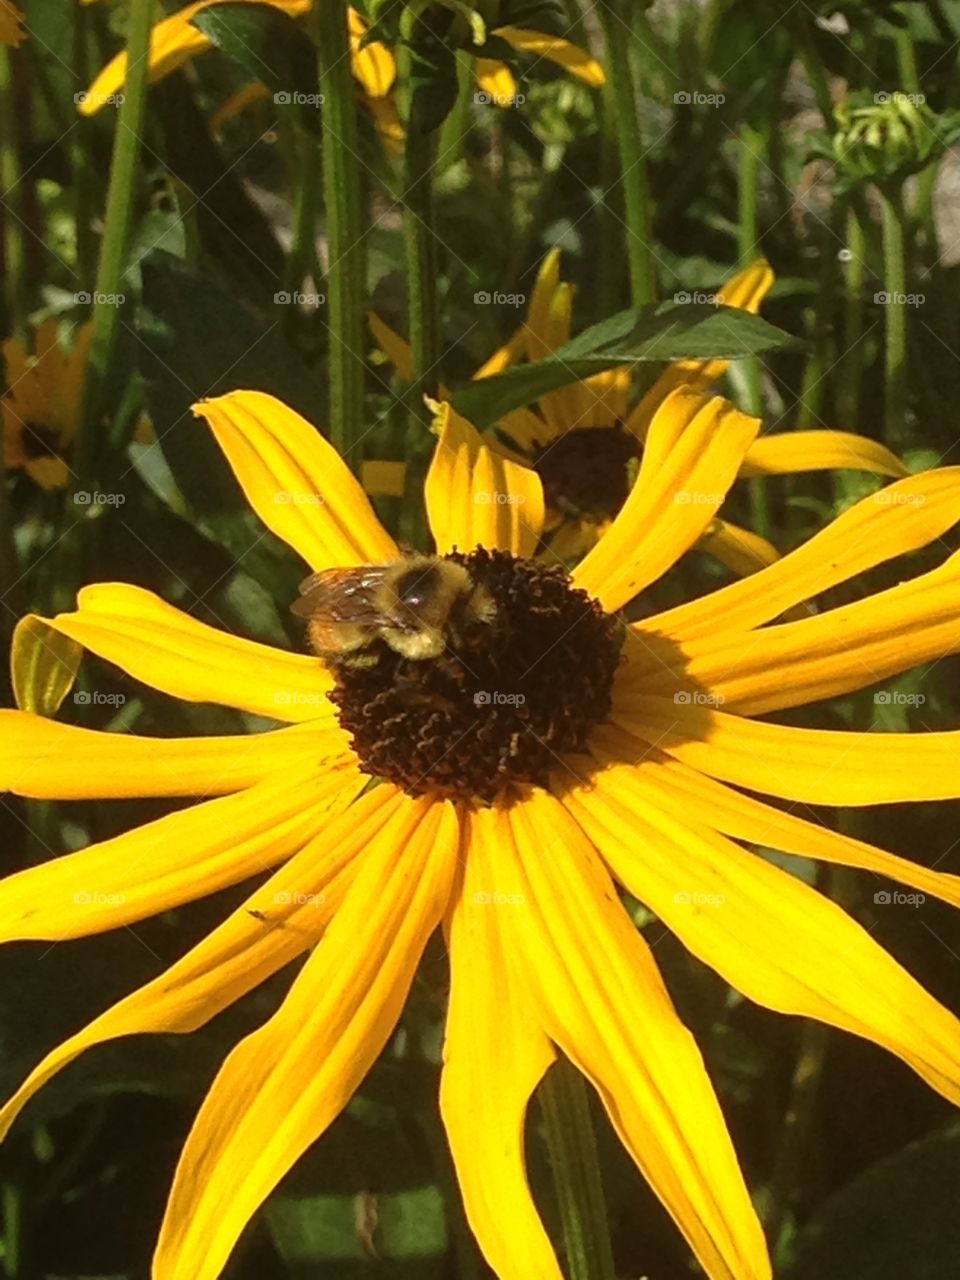 Bee at work 